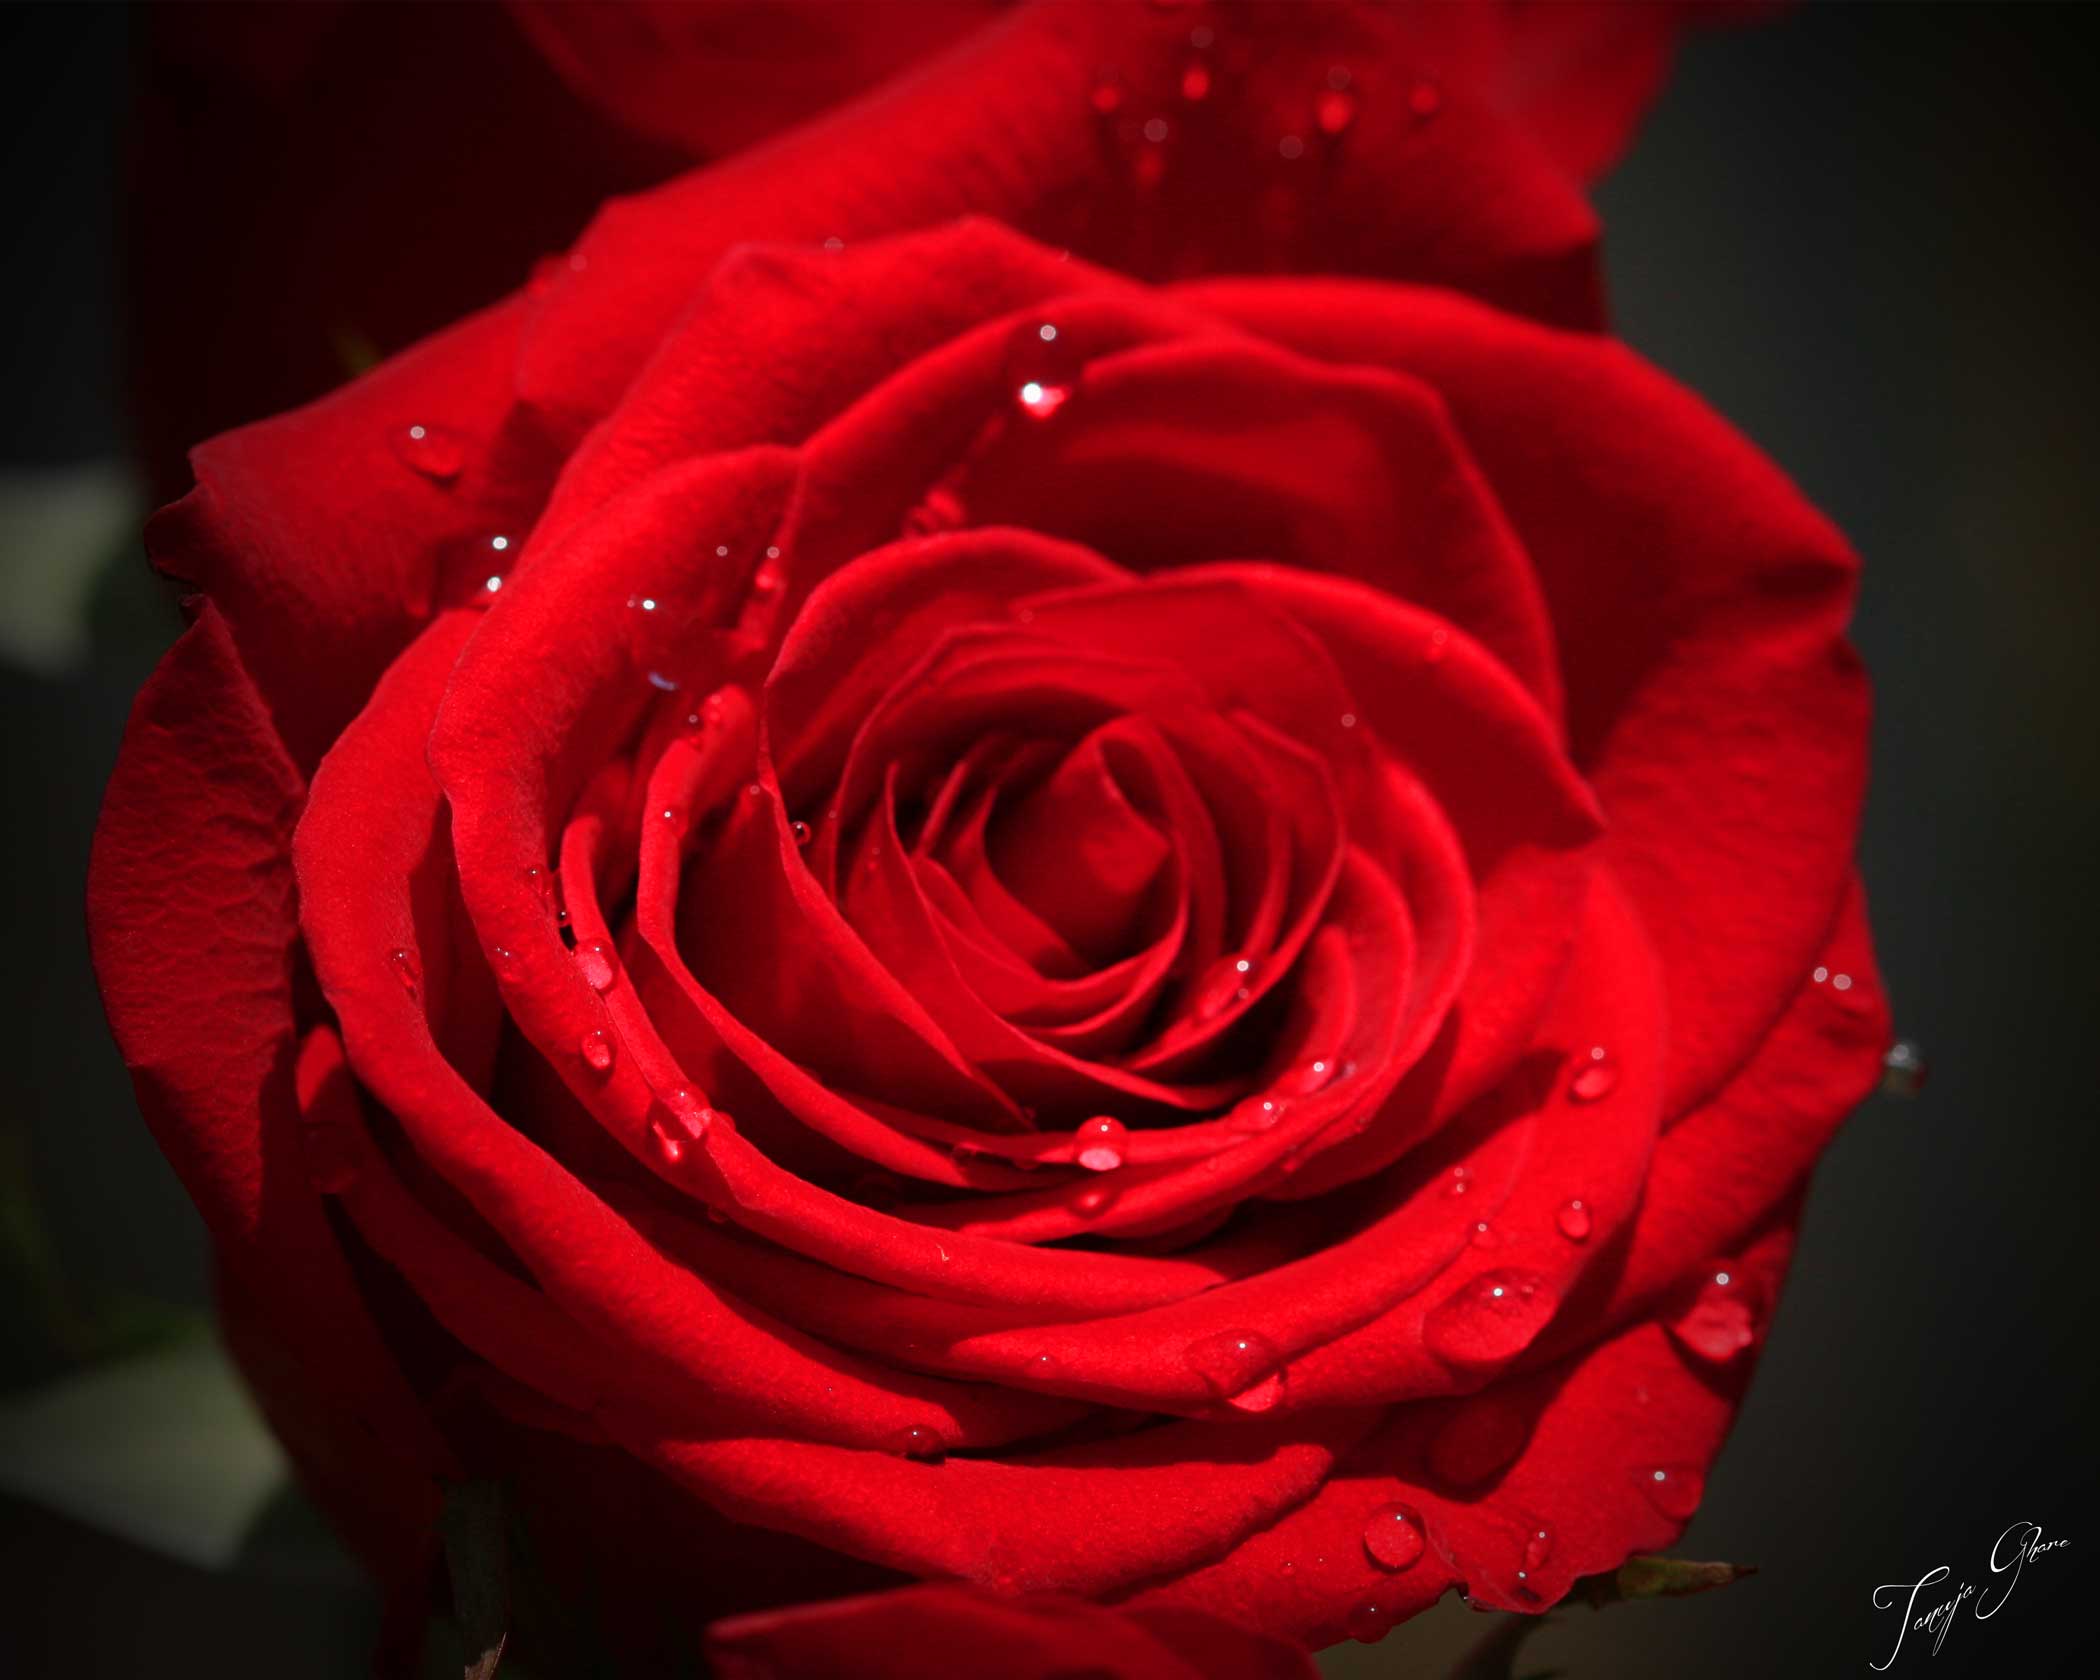 red_rose_with_dew_tg